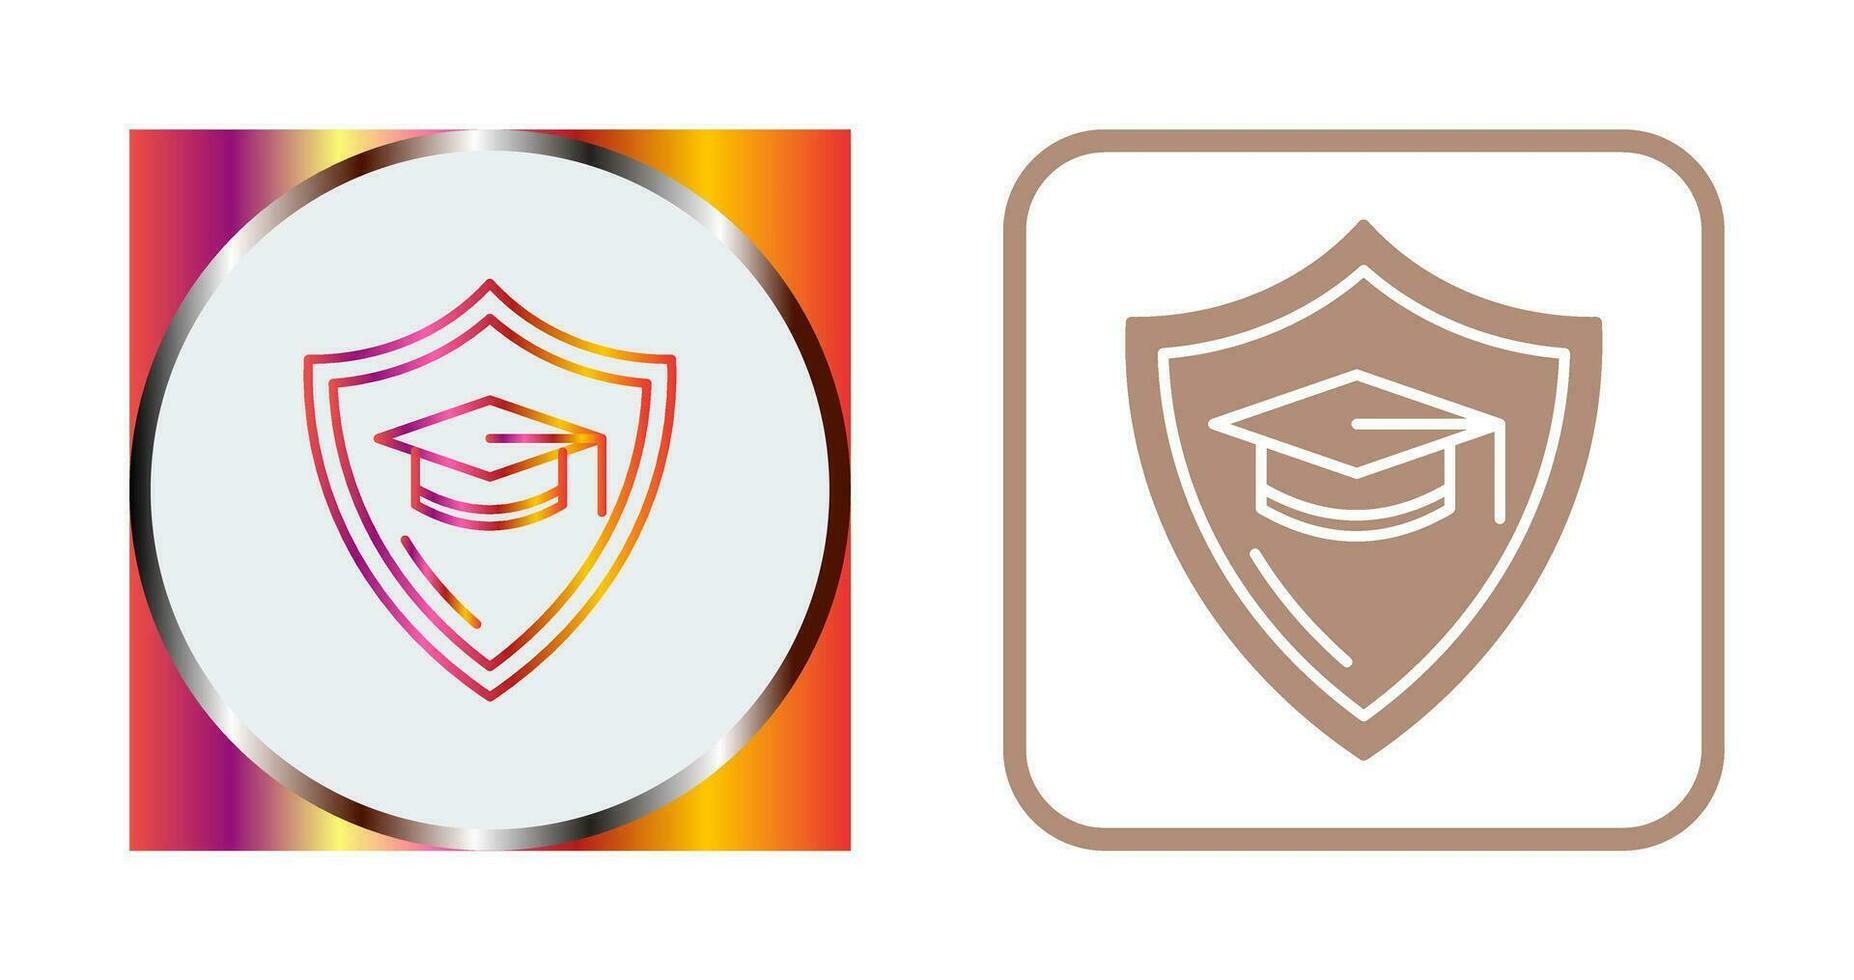 Education Protection Vector Icon